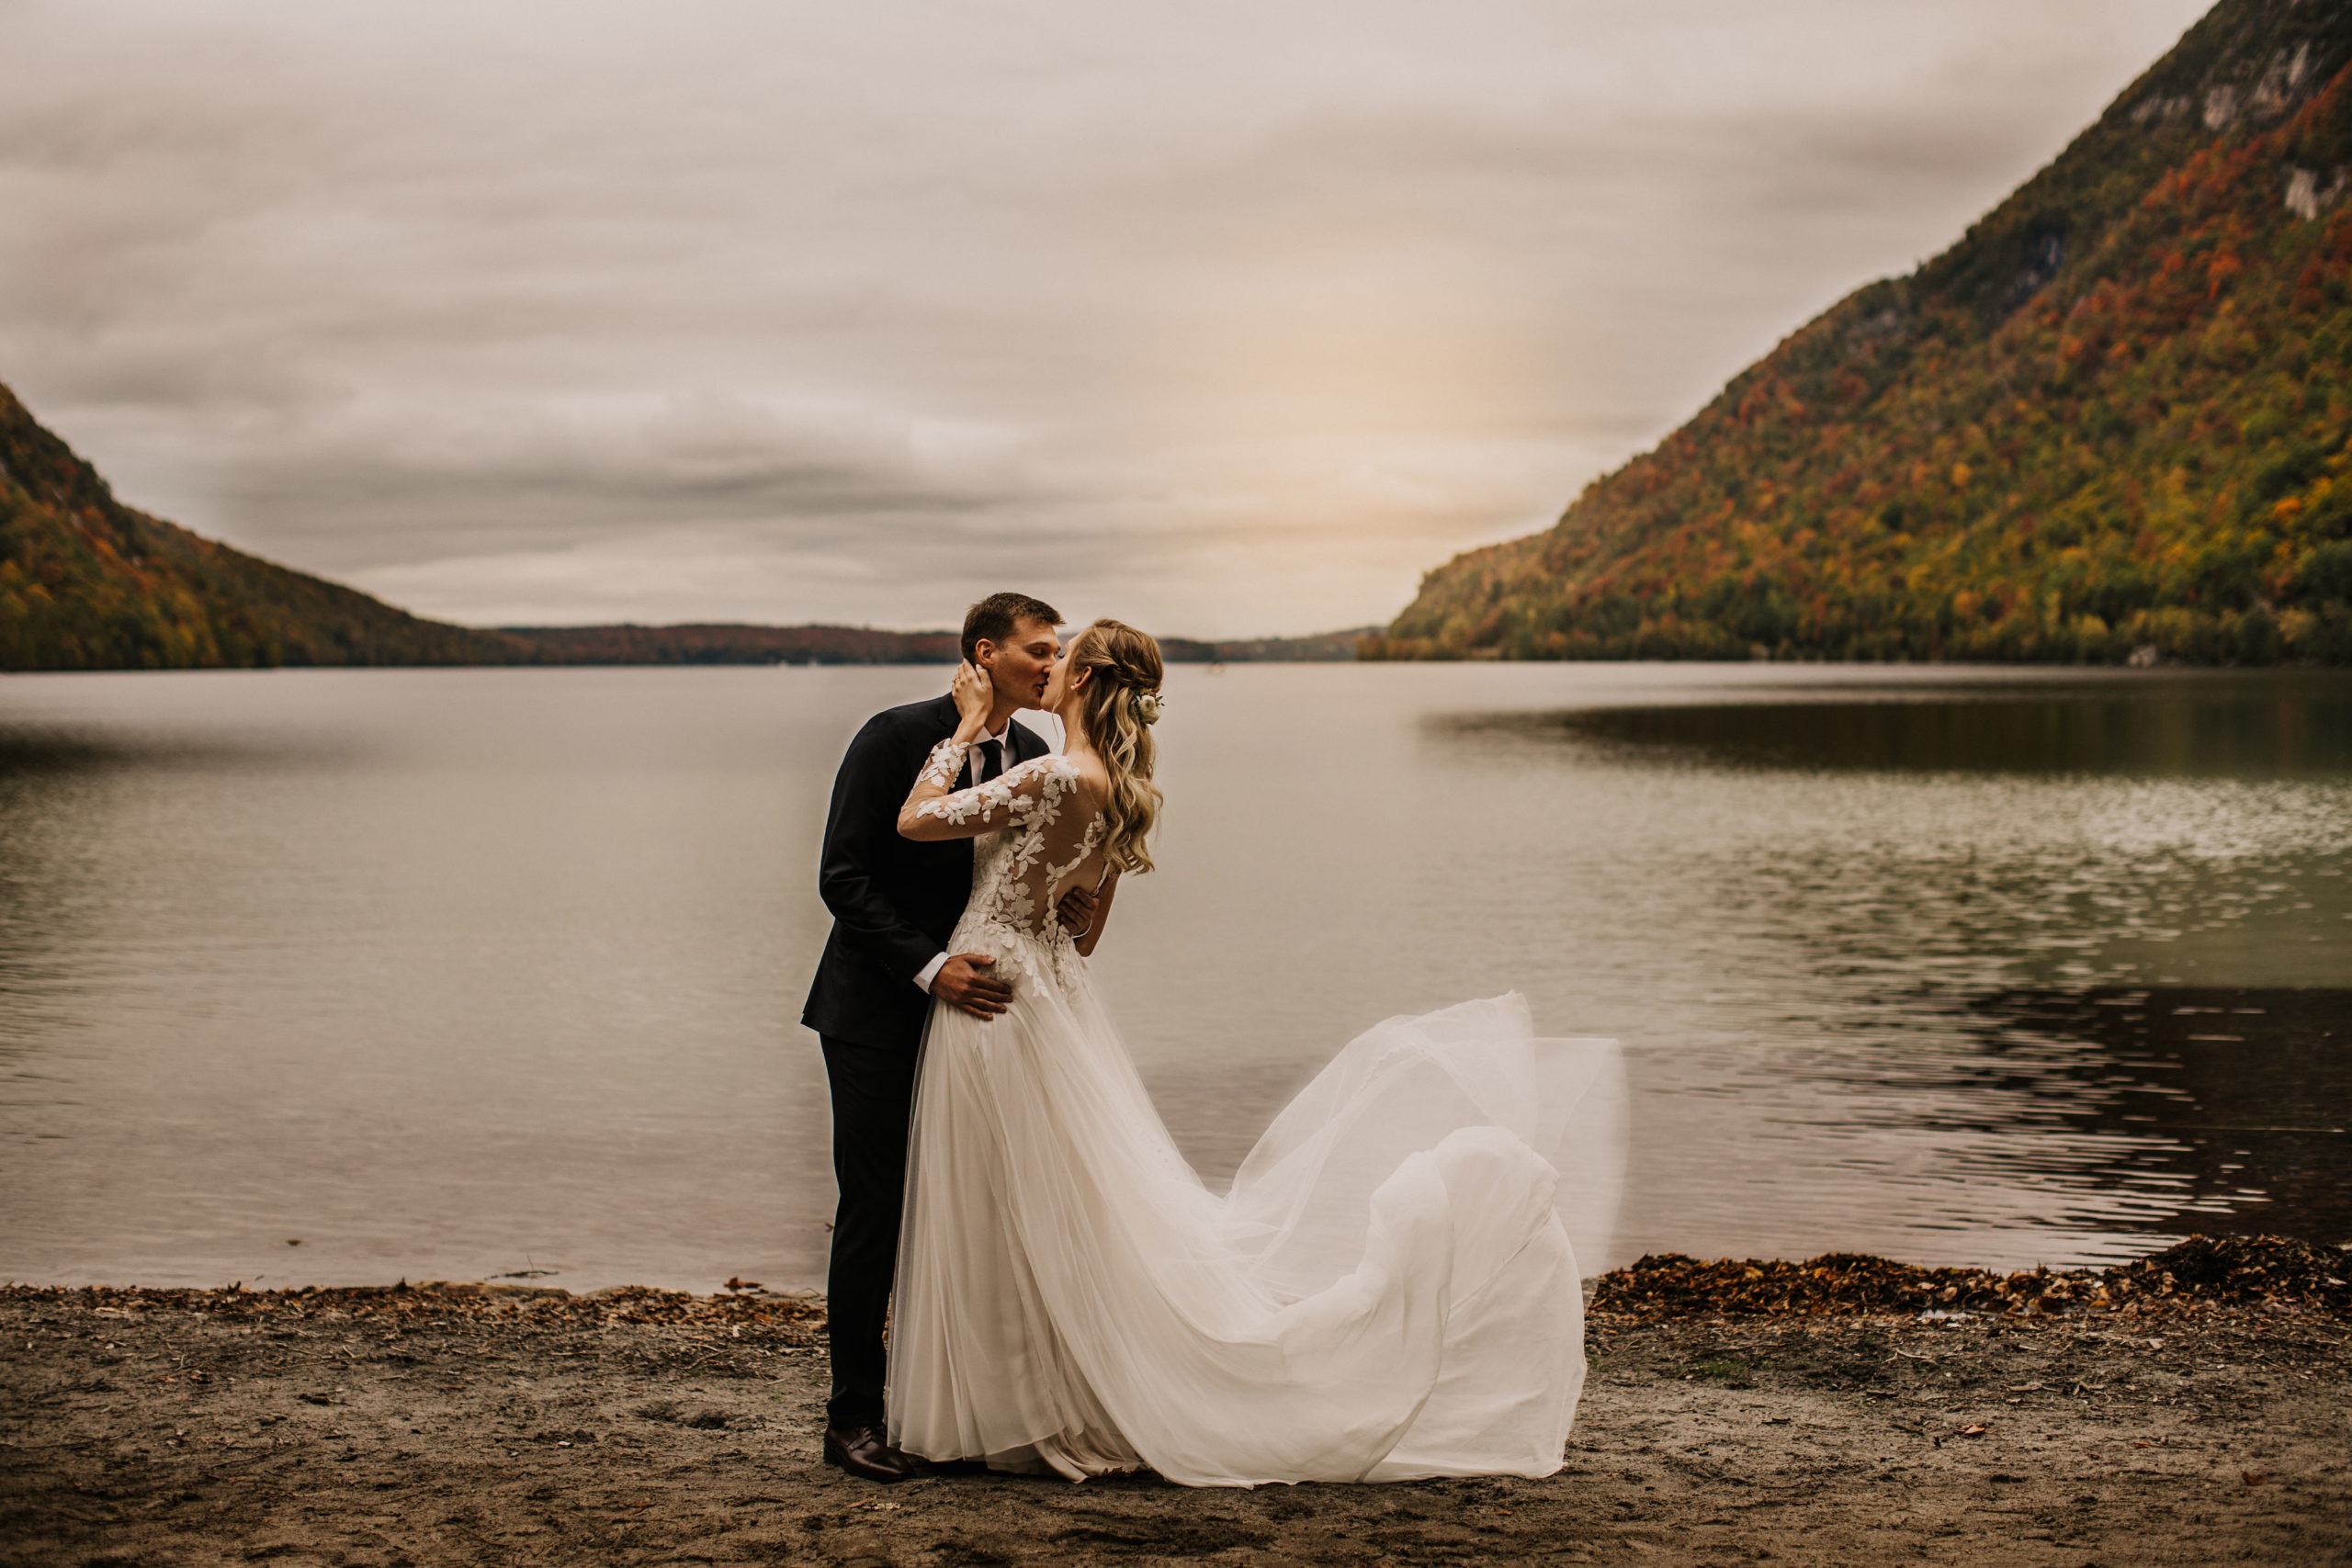 Lake Willoughby, Vermont Elopement